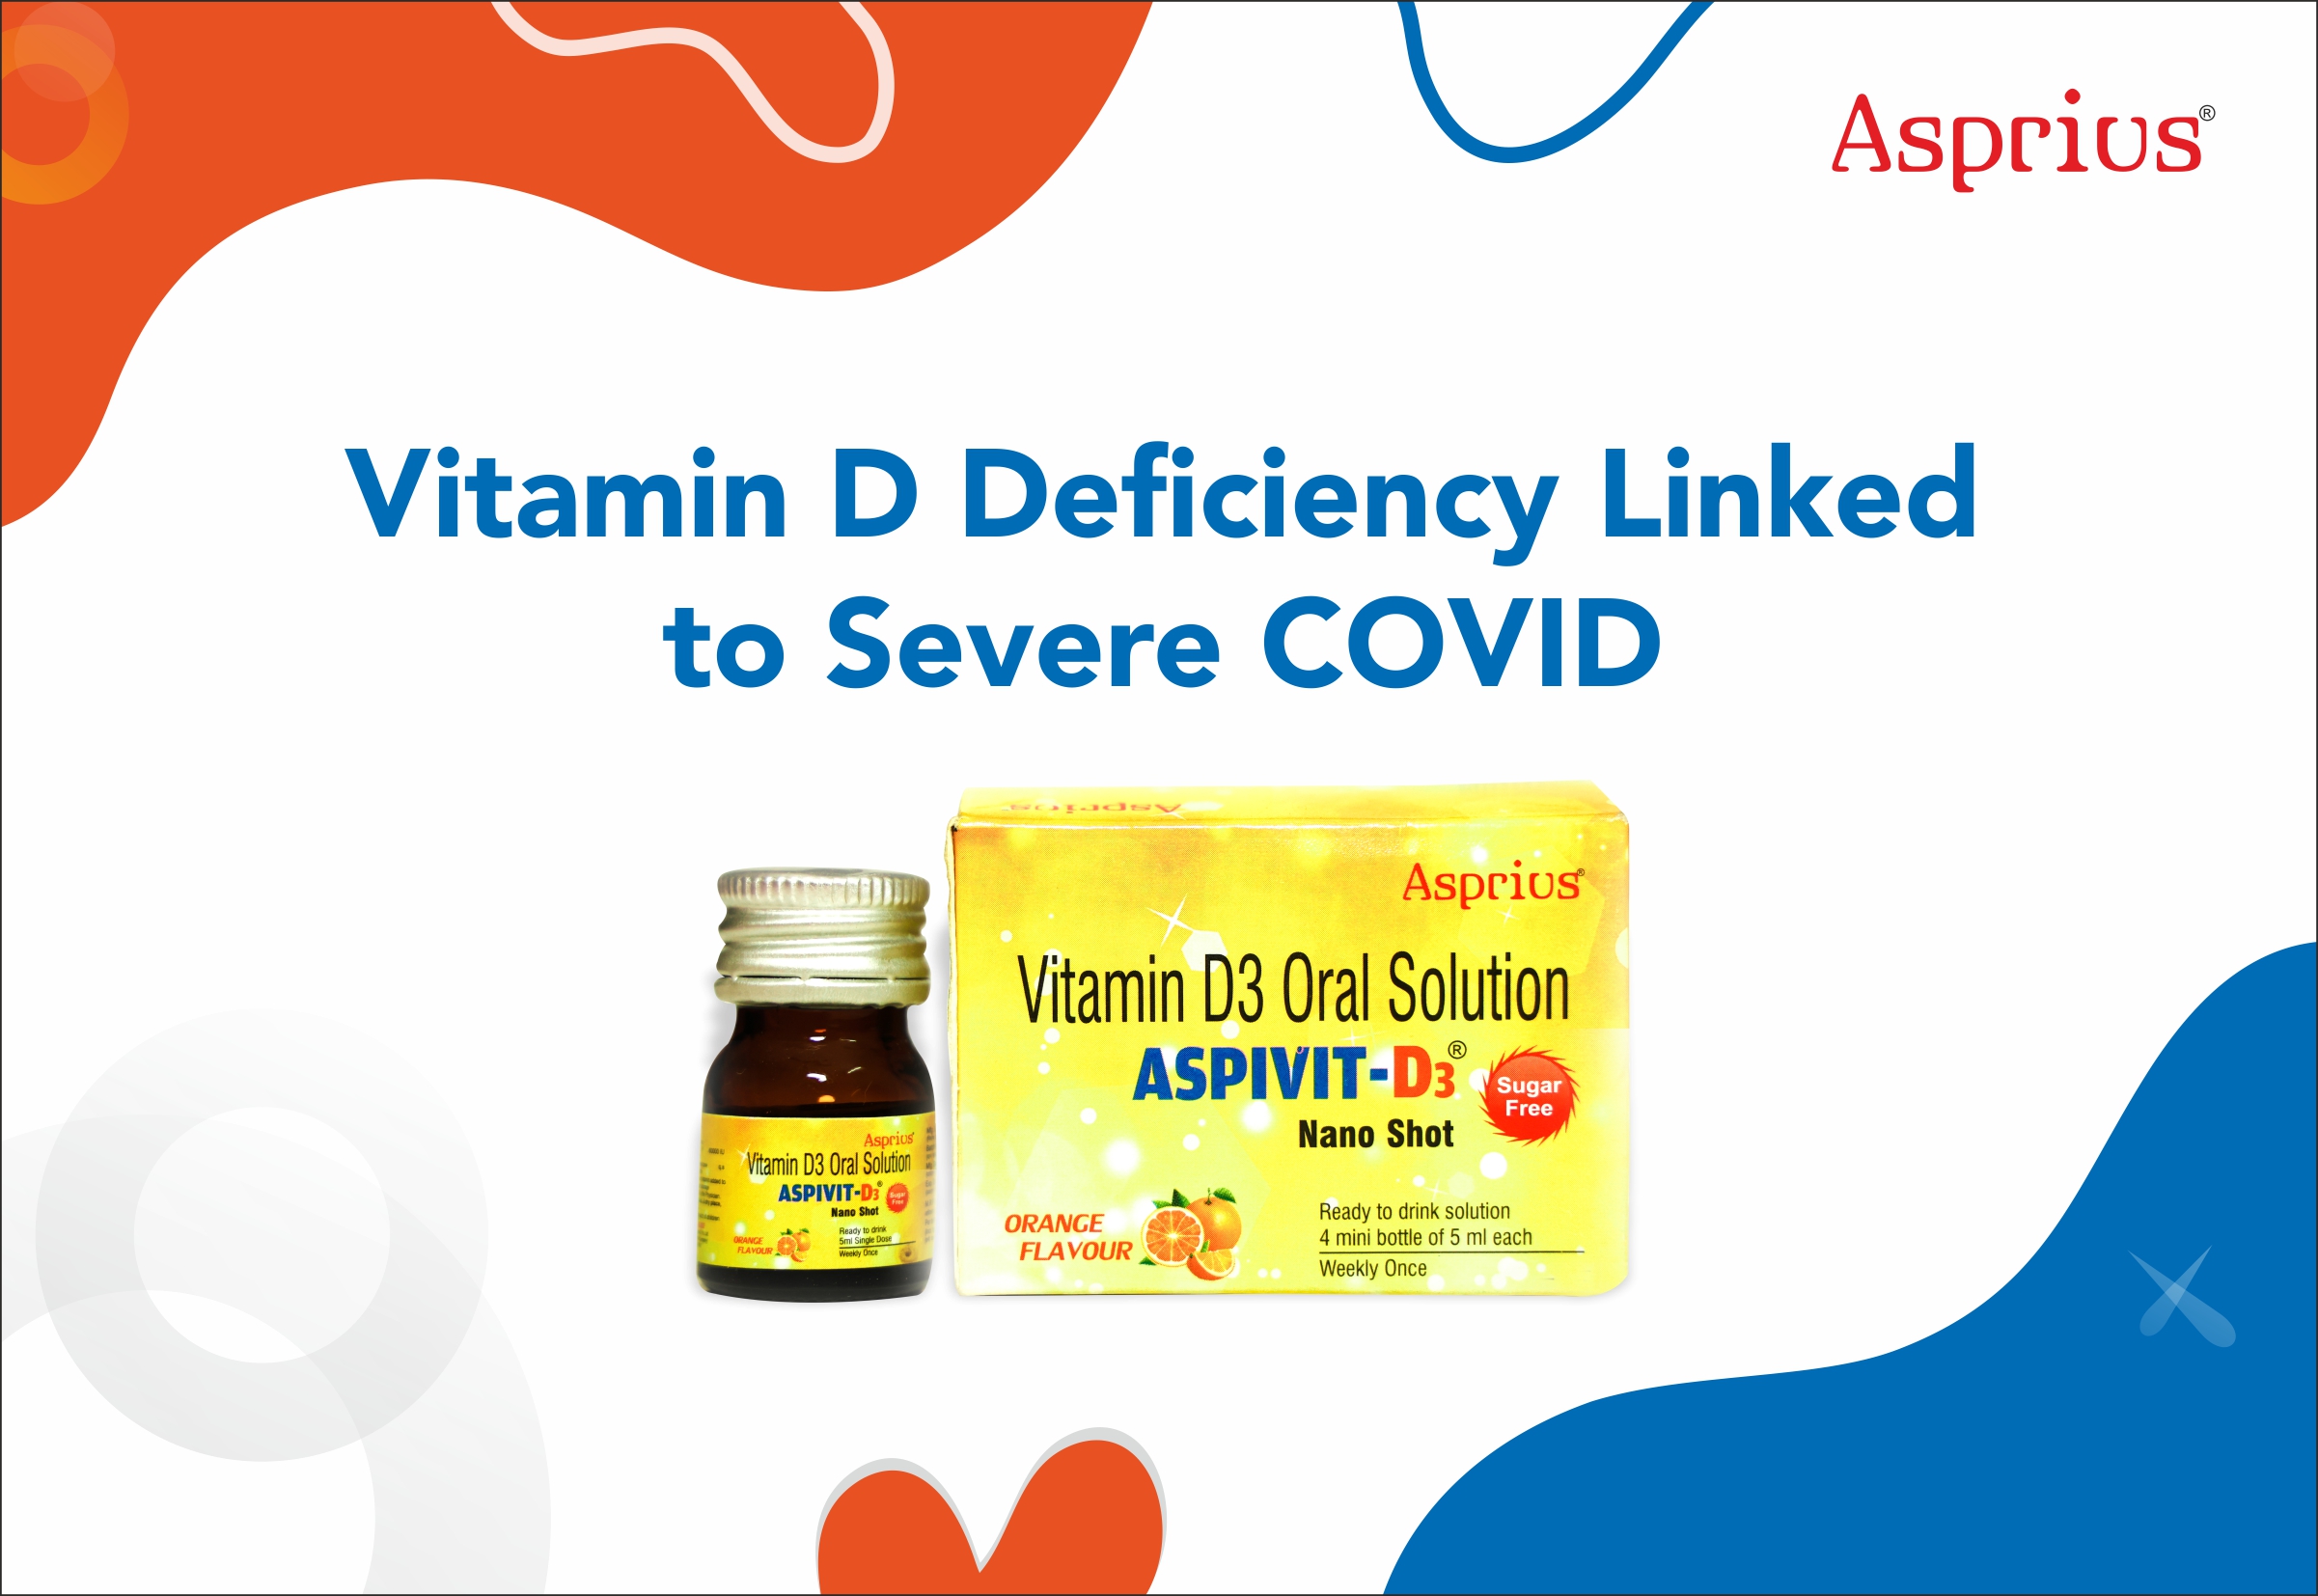 Vitamin D Deficiency Linked to Severe COVID